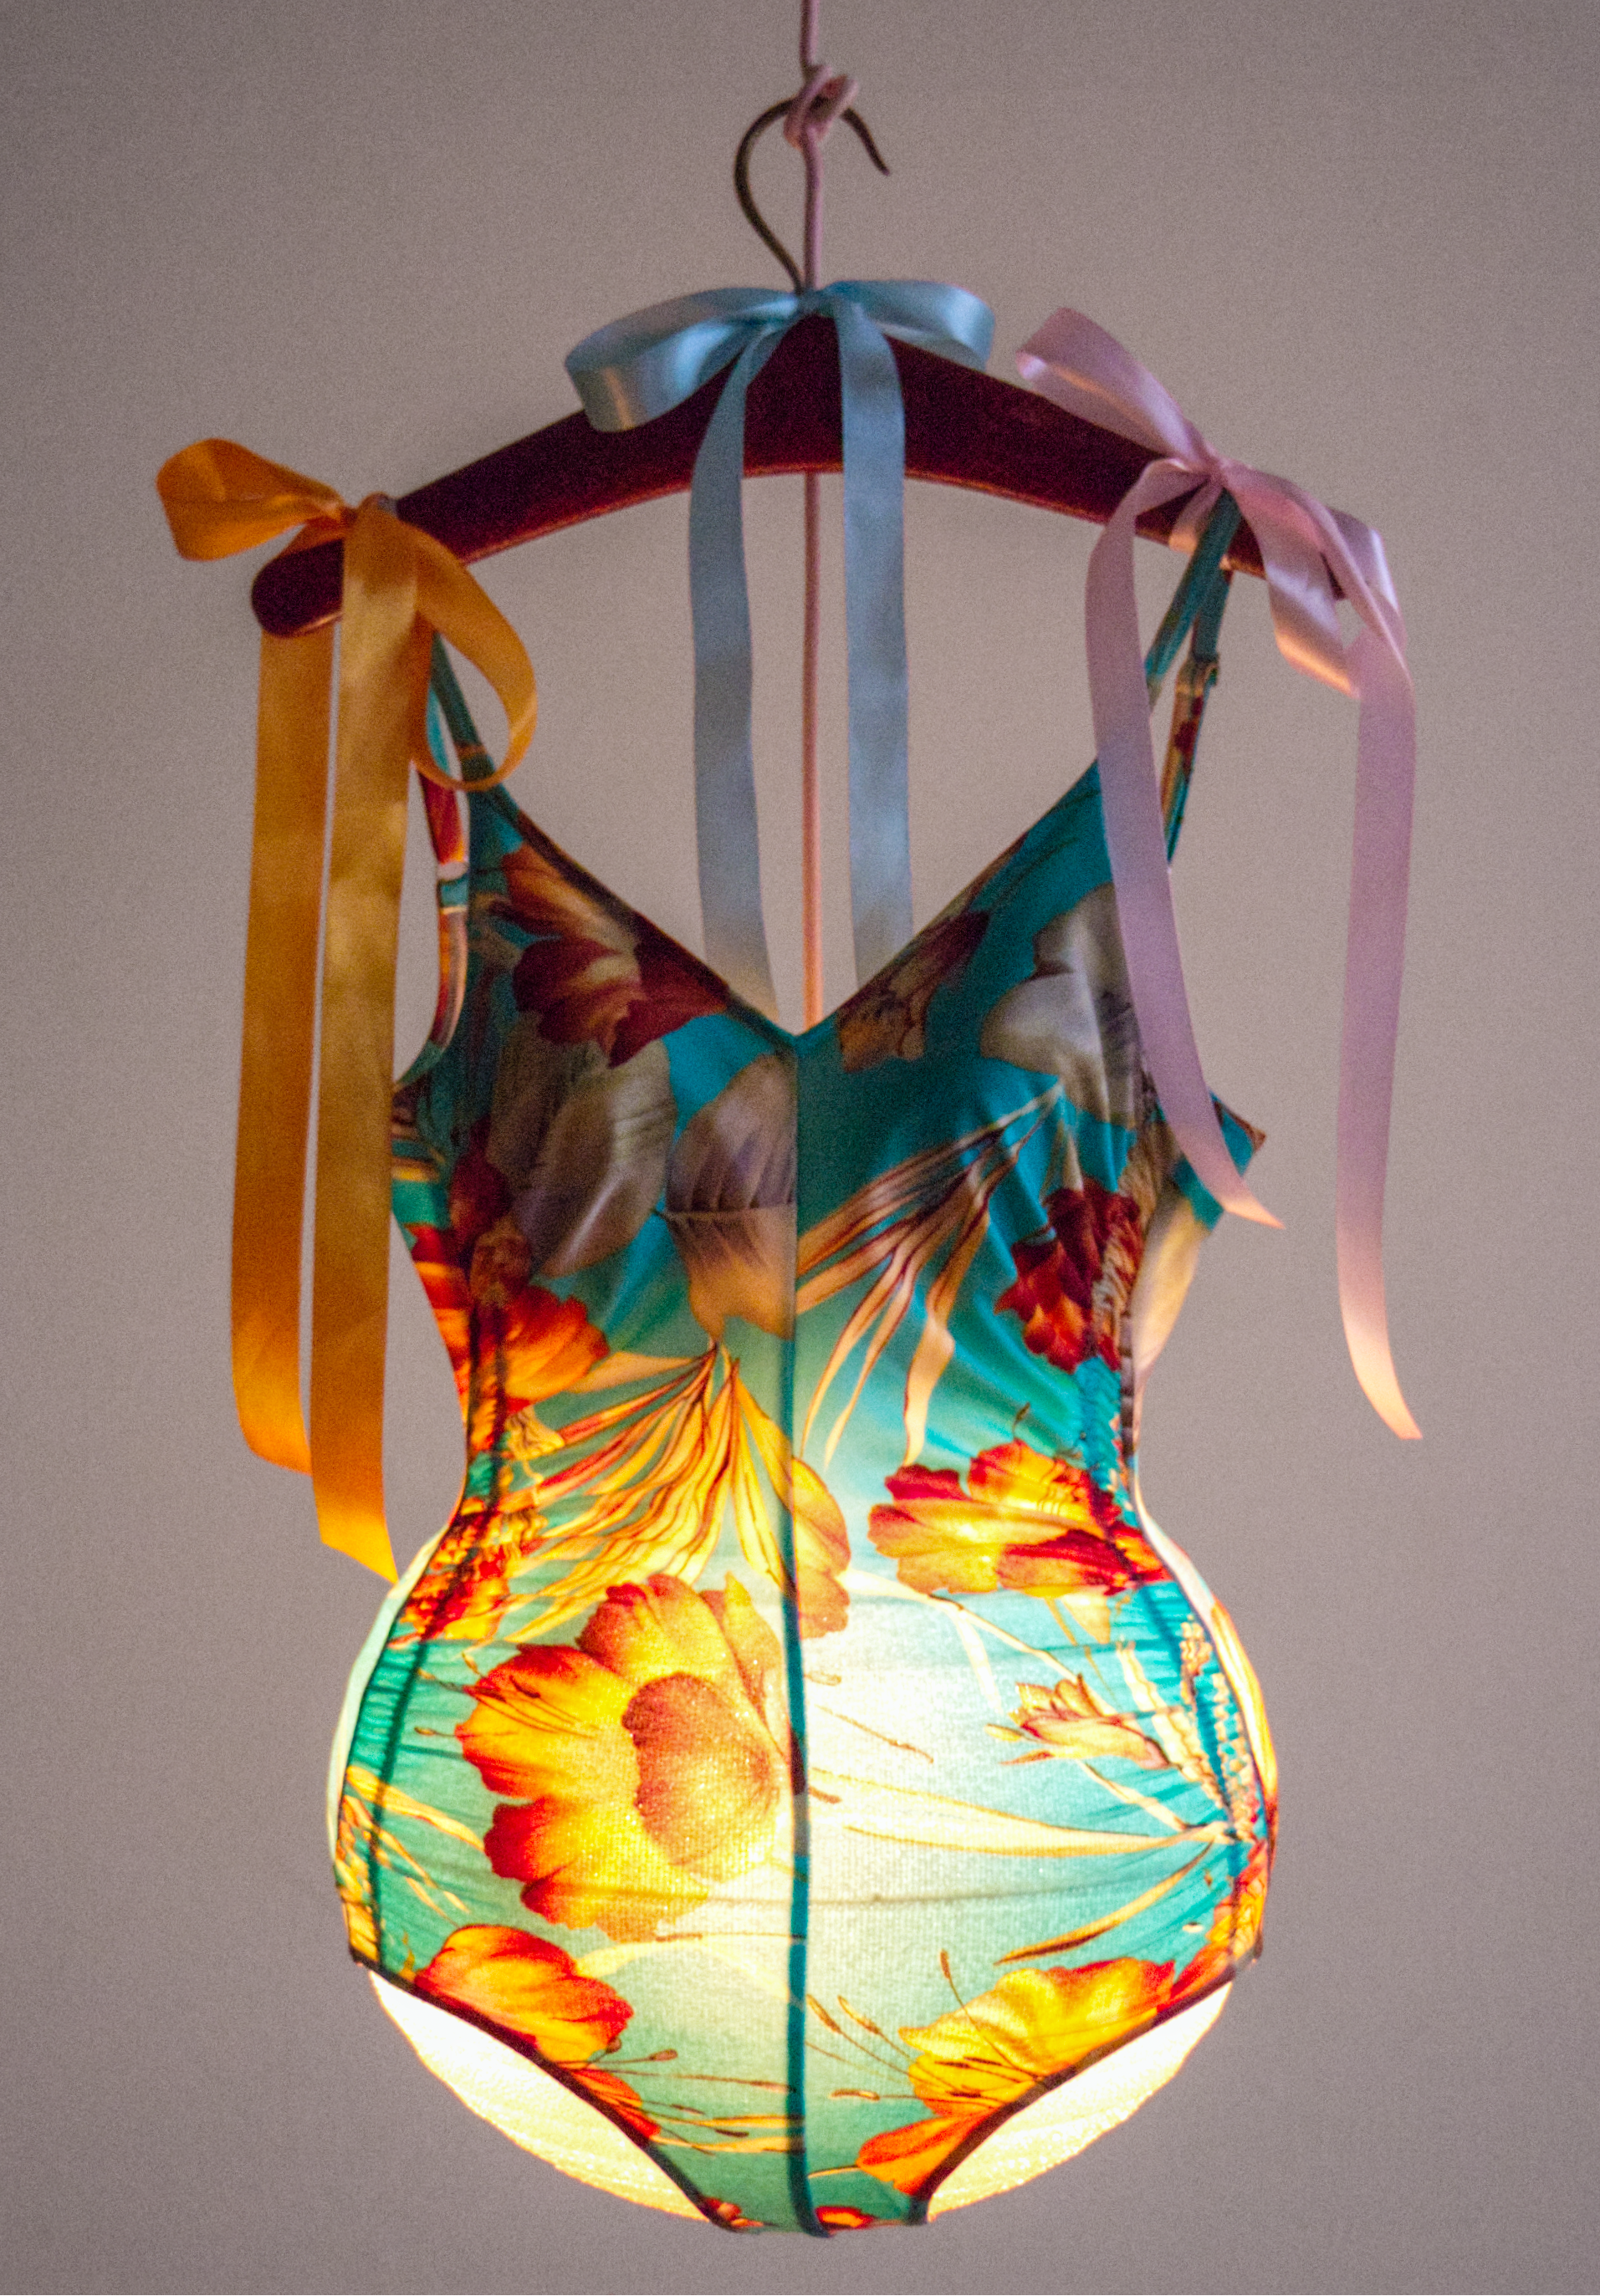 The Wick - Anouk, The Enlightened Granddaughter (orange turquoise) 
2021
Swimsuit, round metal lamp shade skeleton, frosted glass spherical lamp, fabric cable and plug, clothes hanger, ribbons
80 x 42 x 37 cm / 31 1/2 x 16 1/2 x 14 5/8 inches
© Pipilotti Rist
Courtesy the artist and Hauser & Wirth
Photo: Atelier Rist
